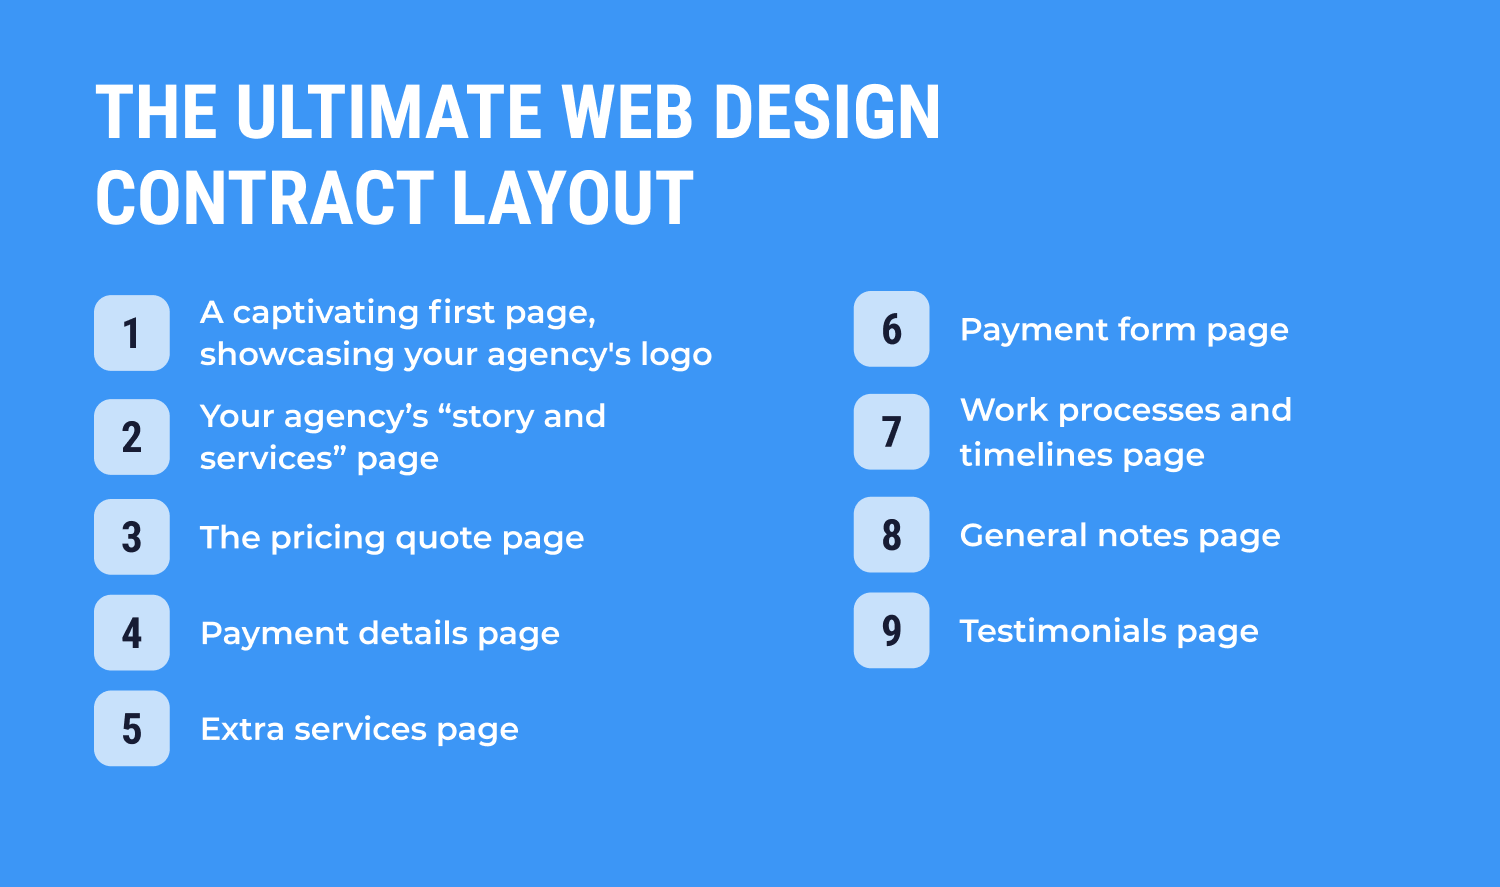 the ultimate web design contract layout is shown on a blue background